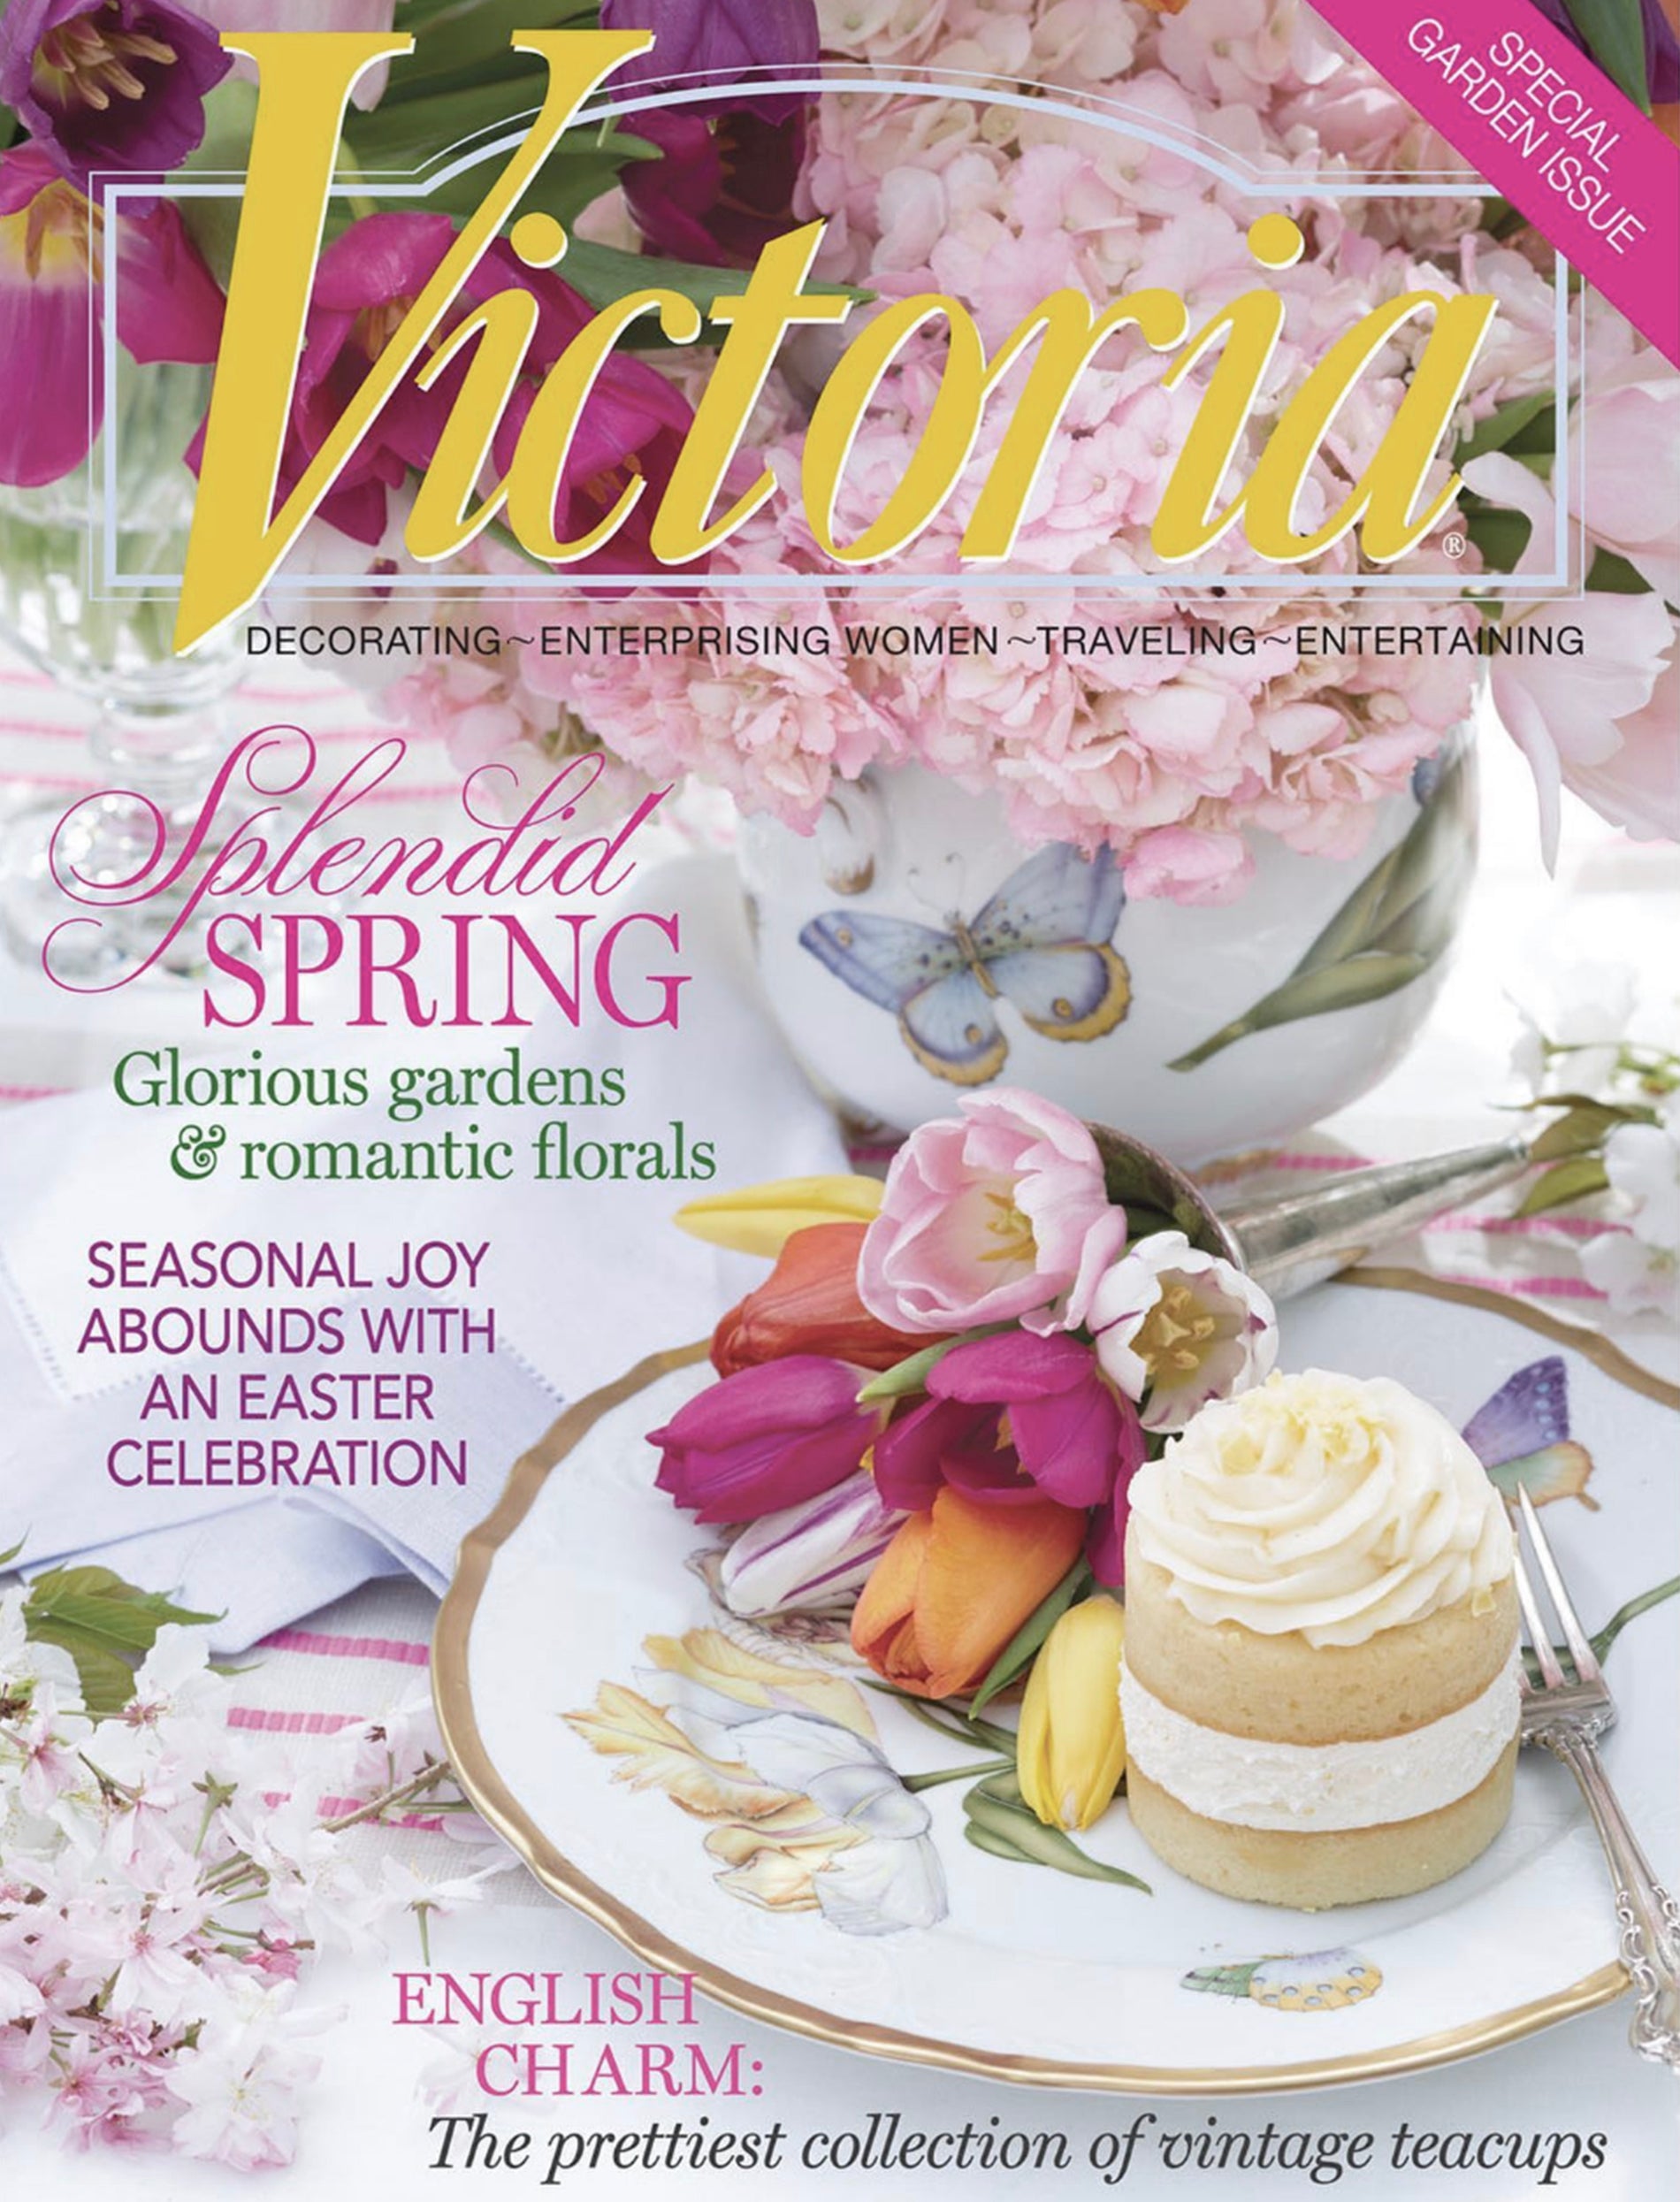 Victoria magazine cover featuring a Spring table with pastry and flowers